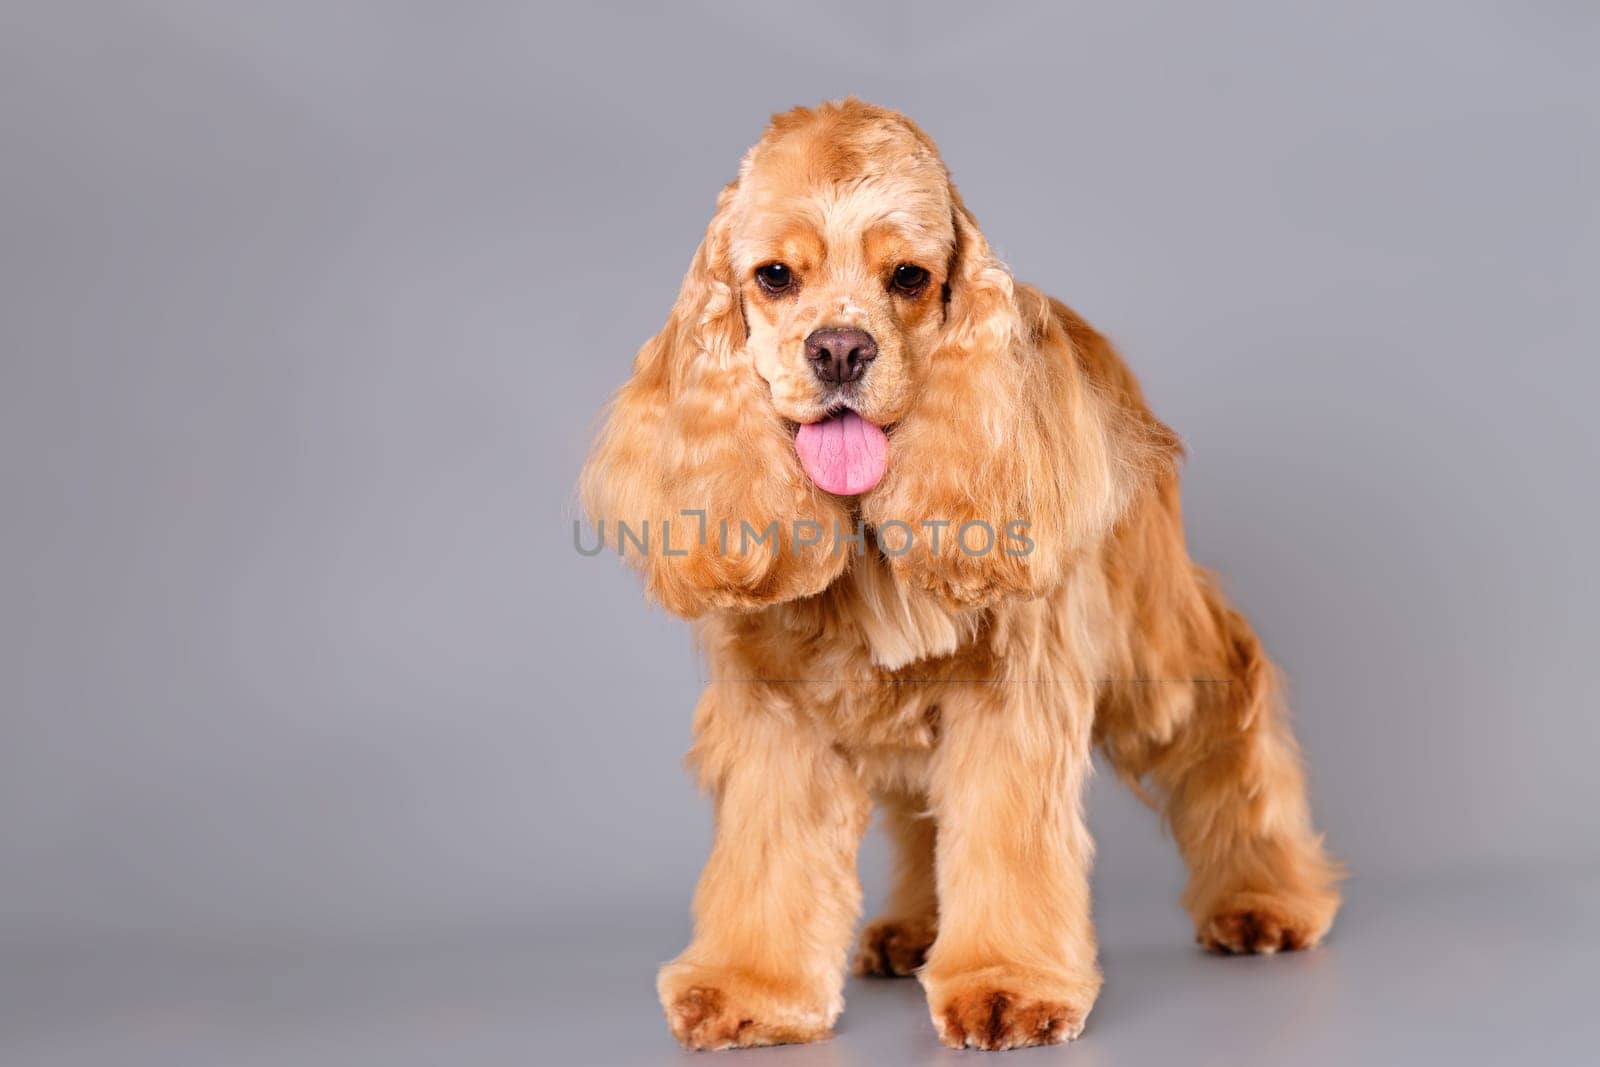 A dog American Cocker spaniel standing in front of a gray background